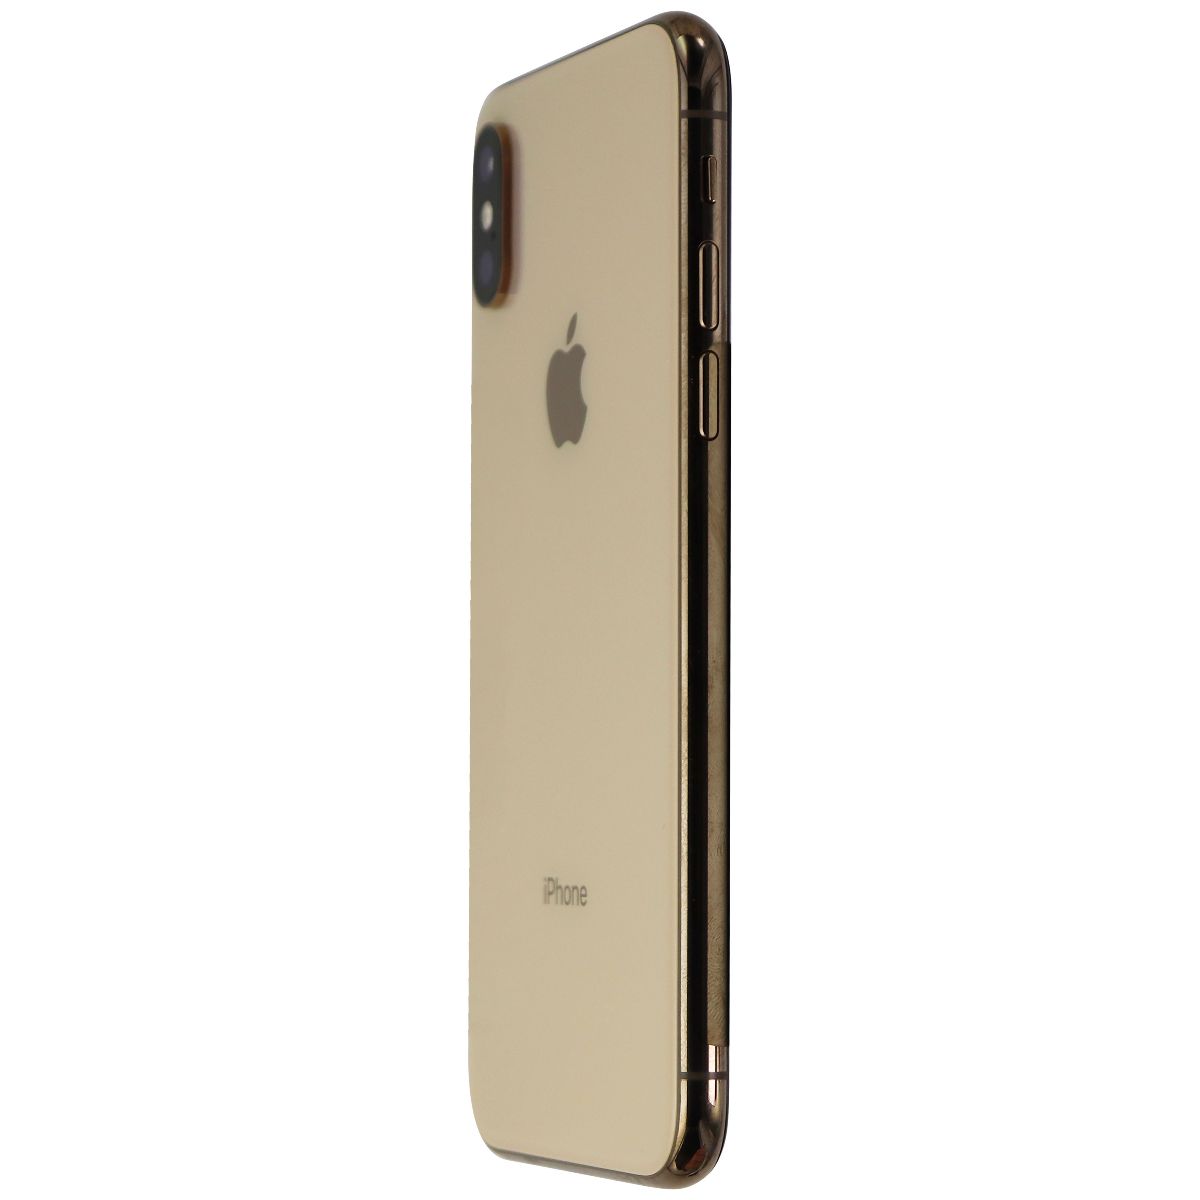 Apple iPhone XS (5.8-inch) Smartphone (A2097) Unlocked 512GB/ Gold - Bad Face ID Cell Phones & Smartphones Apple    - Simple Cell Bulk Wholesale Pricing - USA Seller